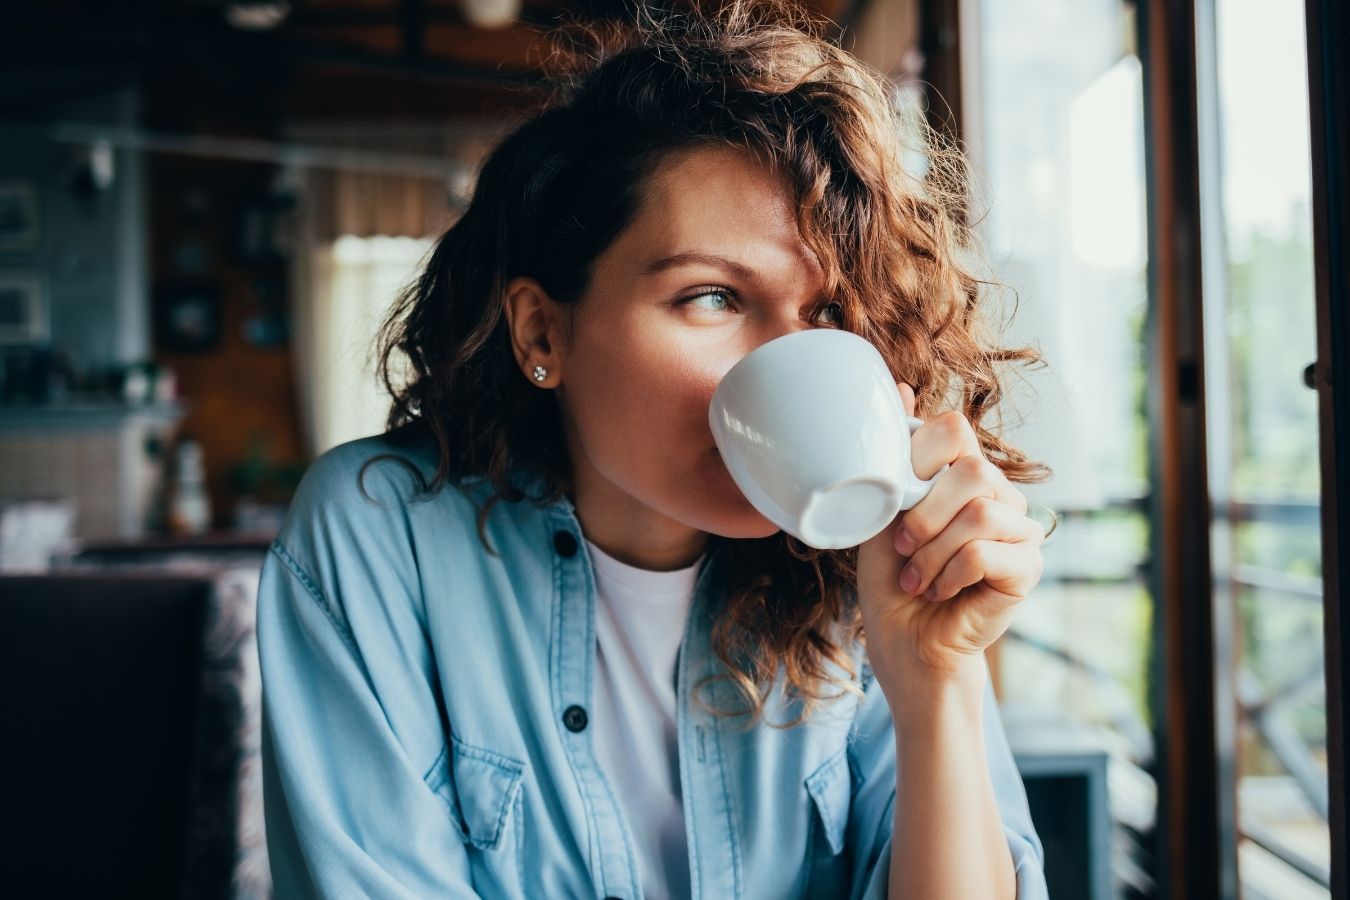 13 Health Benefits Of Coffee Based On Science